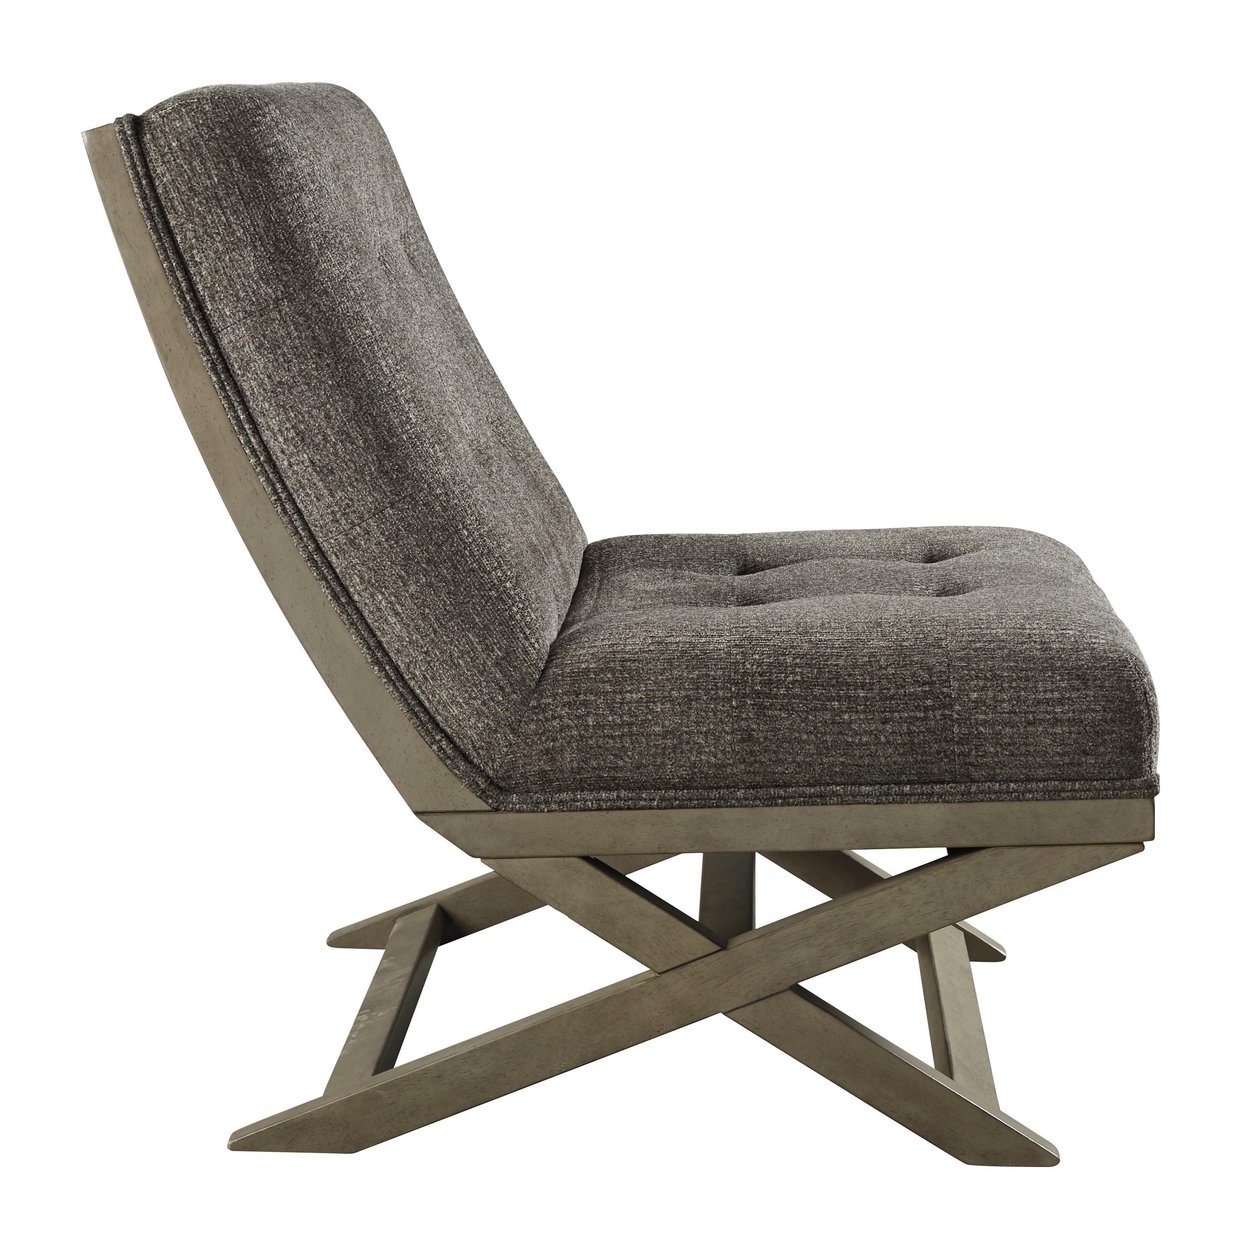 X Frame Base Wooden Accent Chair With Padded Seat And Back, Brown And Gray- Saltoro Sherpi